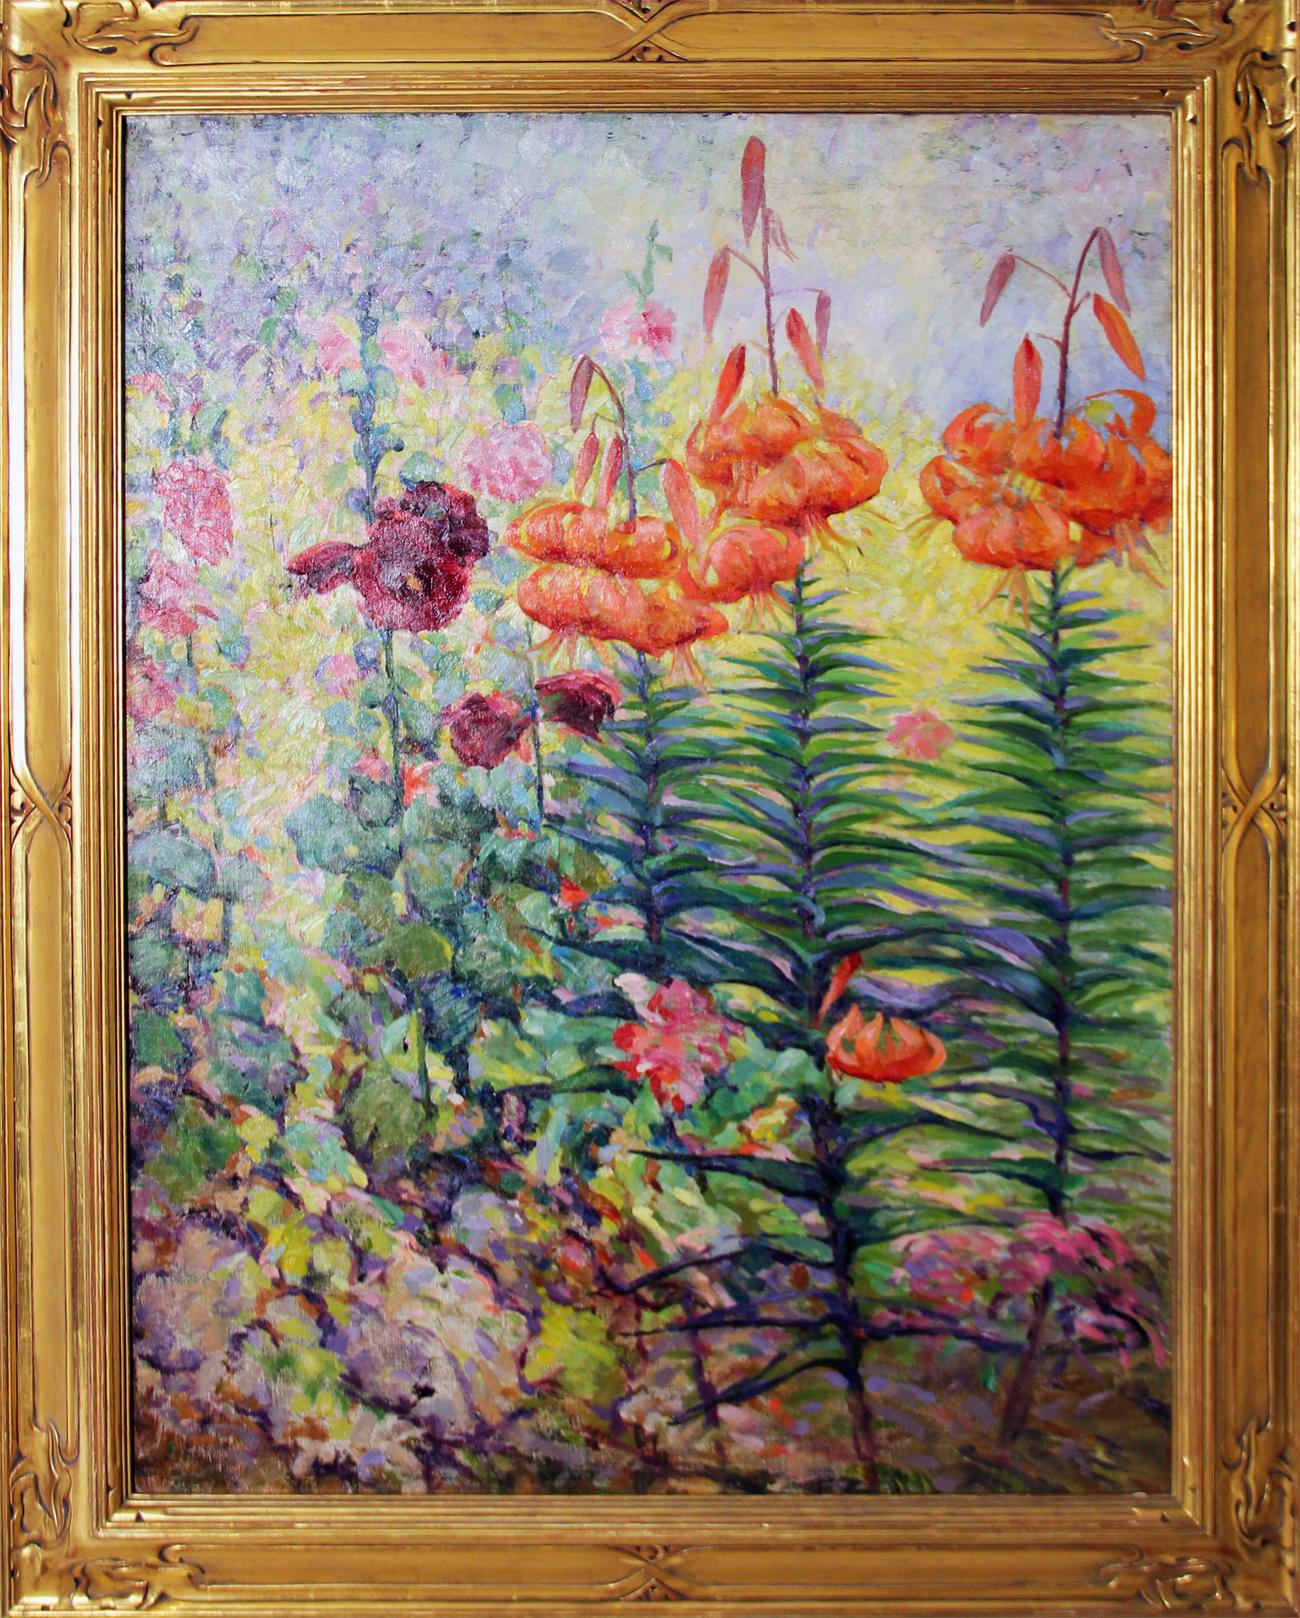 Henry Ryan MacGinnis Landscape Painting - Tiger Lillies, American Impressionist Floral Landscape, Oil on Canvas, Framed